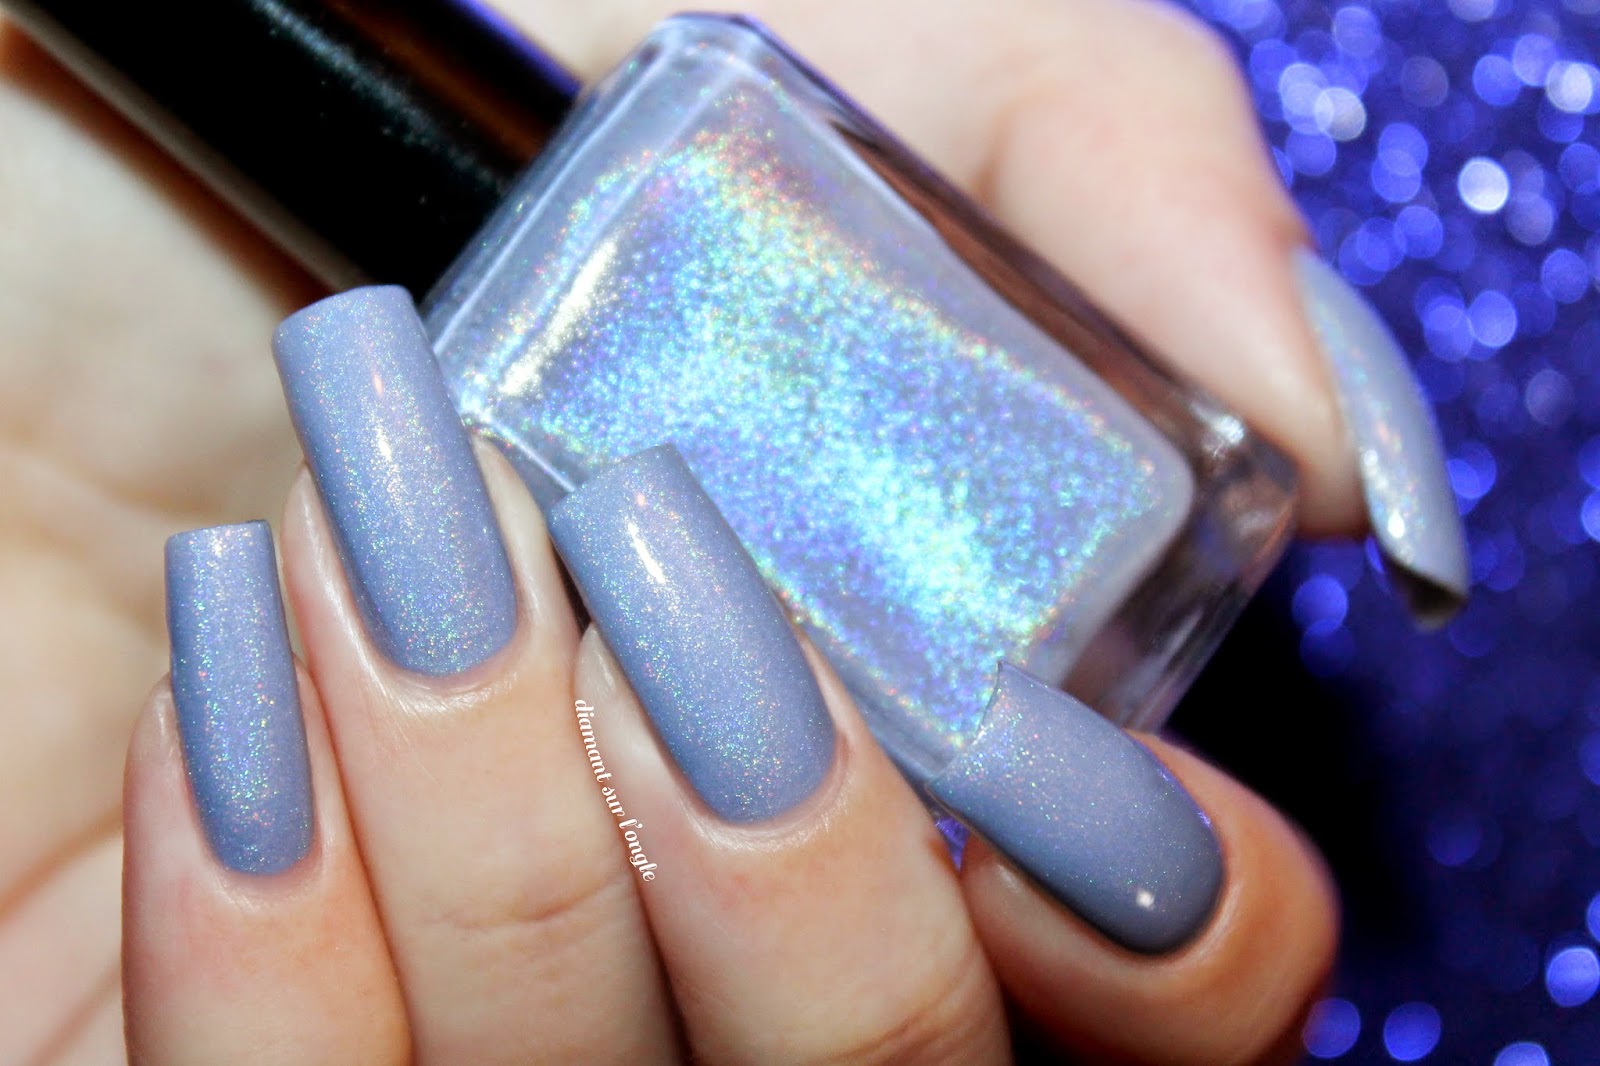 Swatch of April 2014 by Enchanted Polish